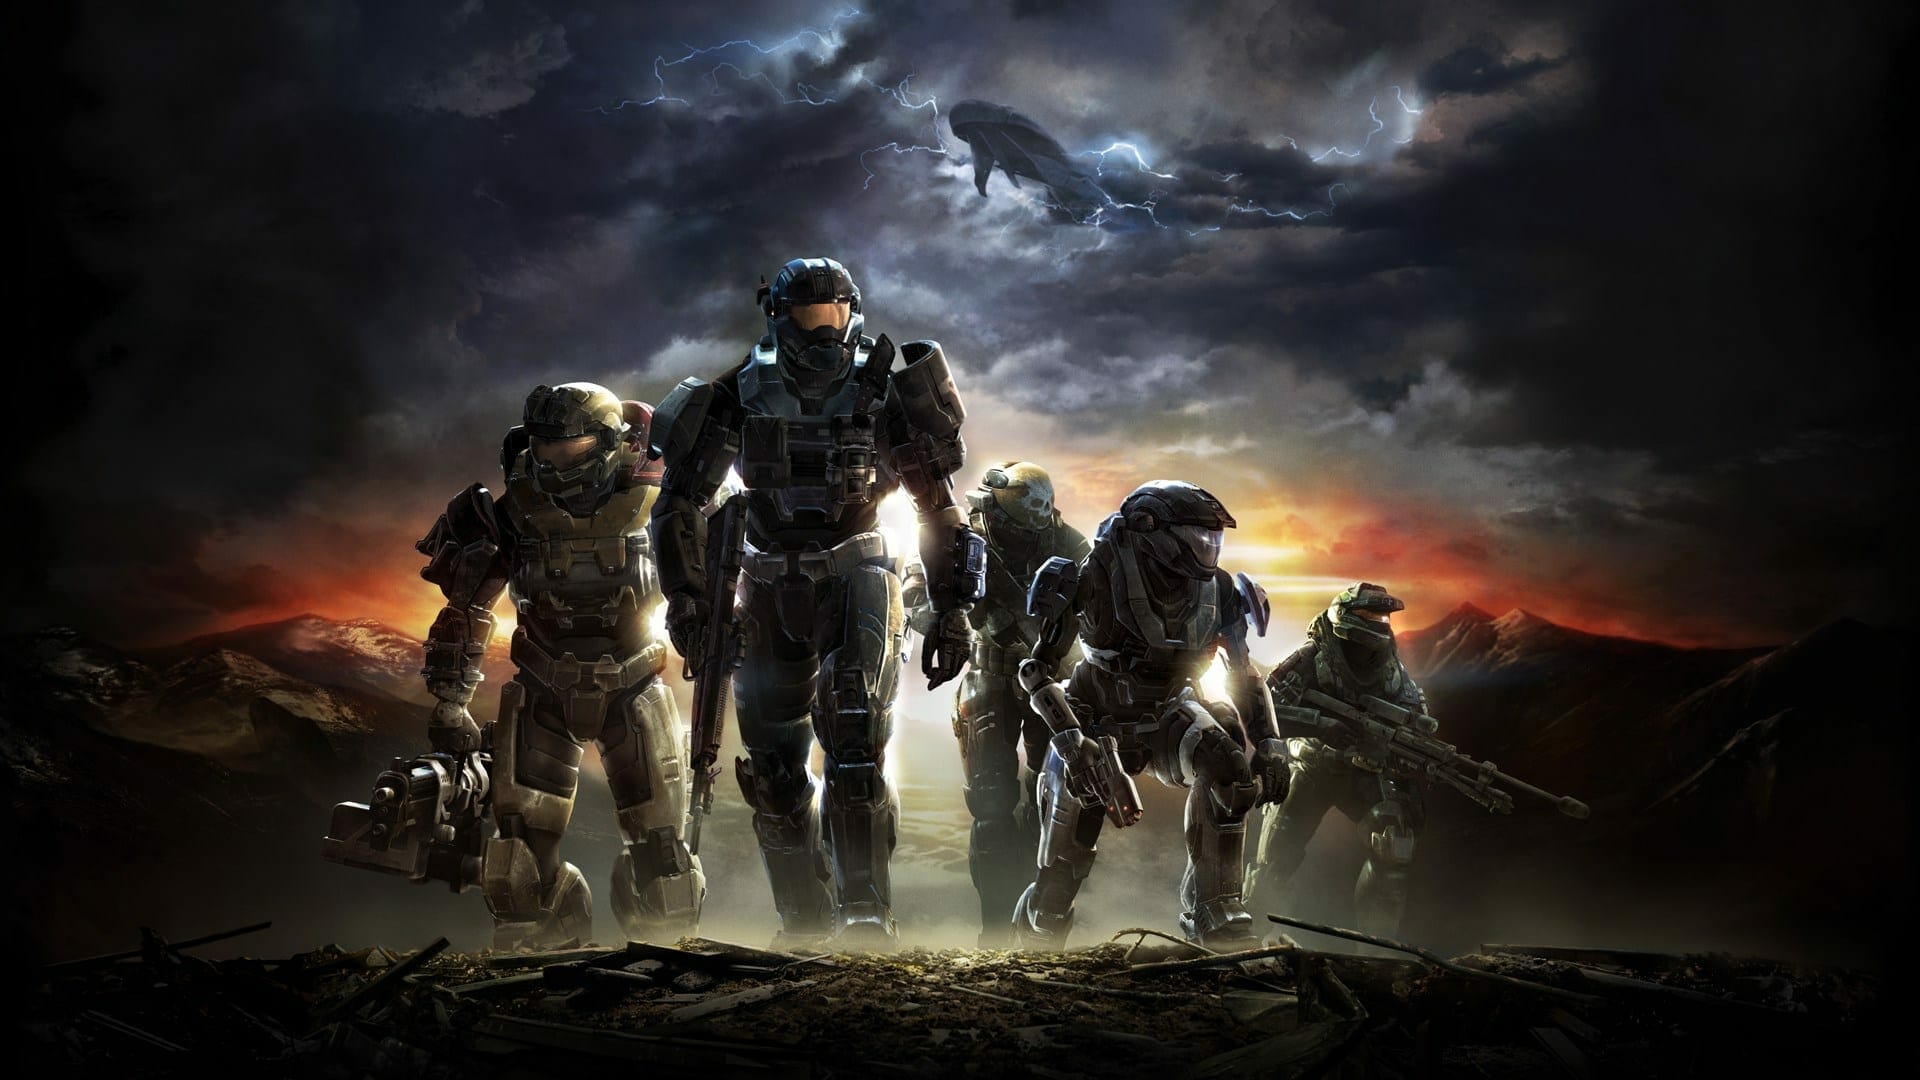 Halo Reach PC System Requirements